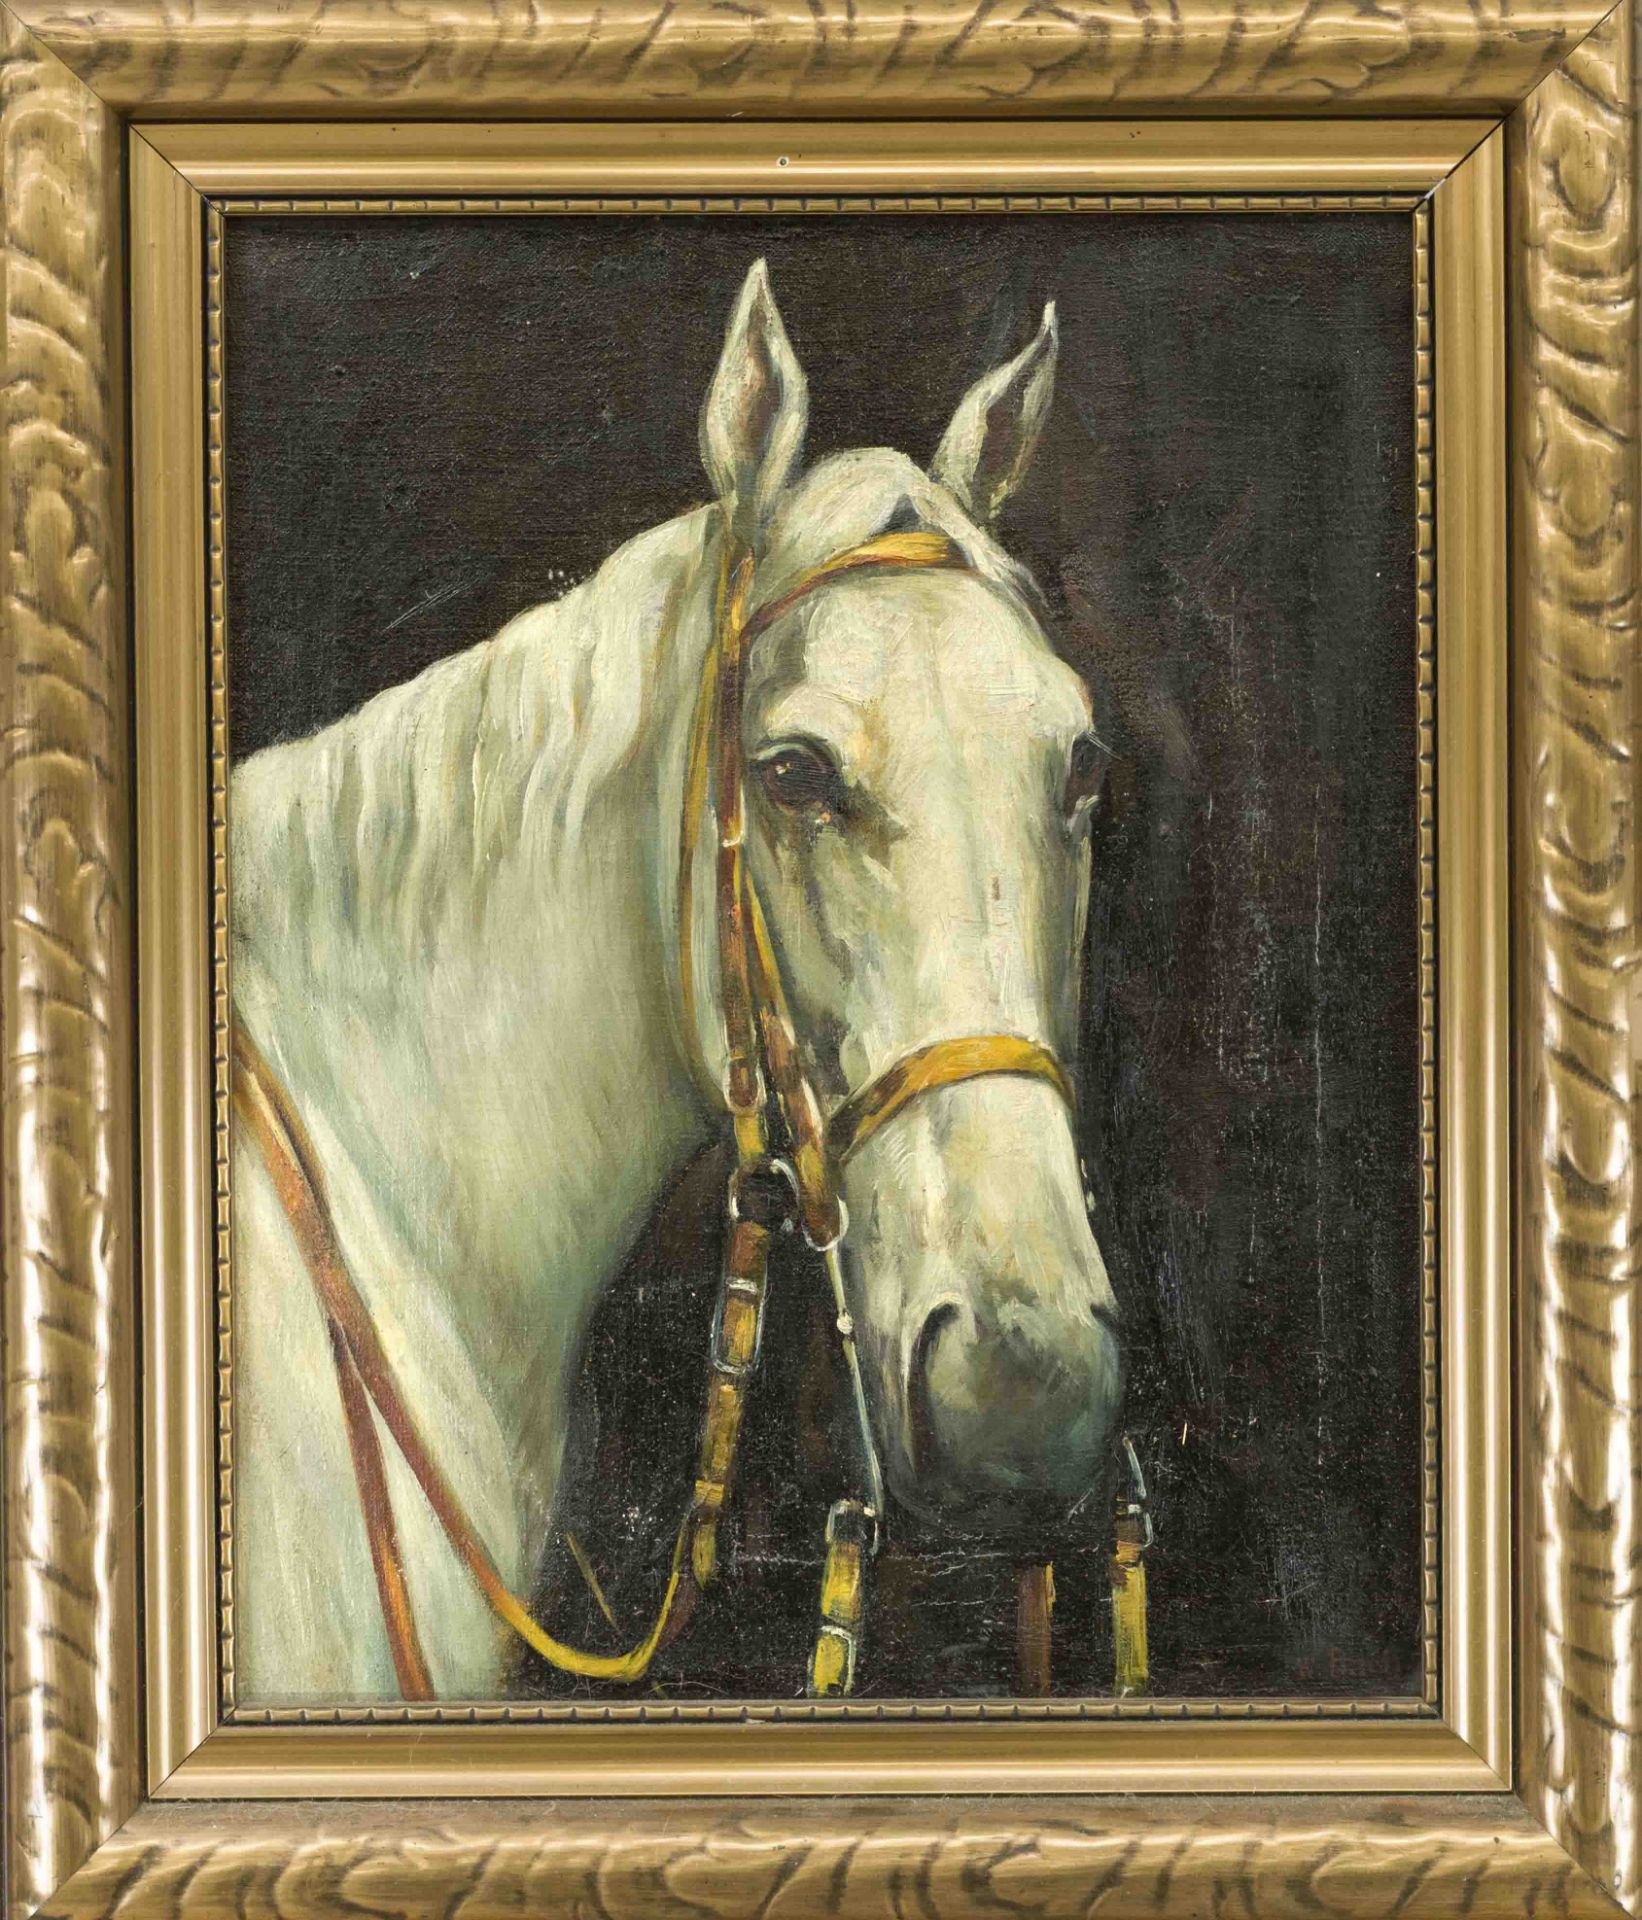 W. Bach, animal painter c. 1910, portrait of a horse, oil on canvas, signed lower right, 50 x 40 cm,